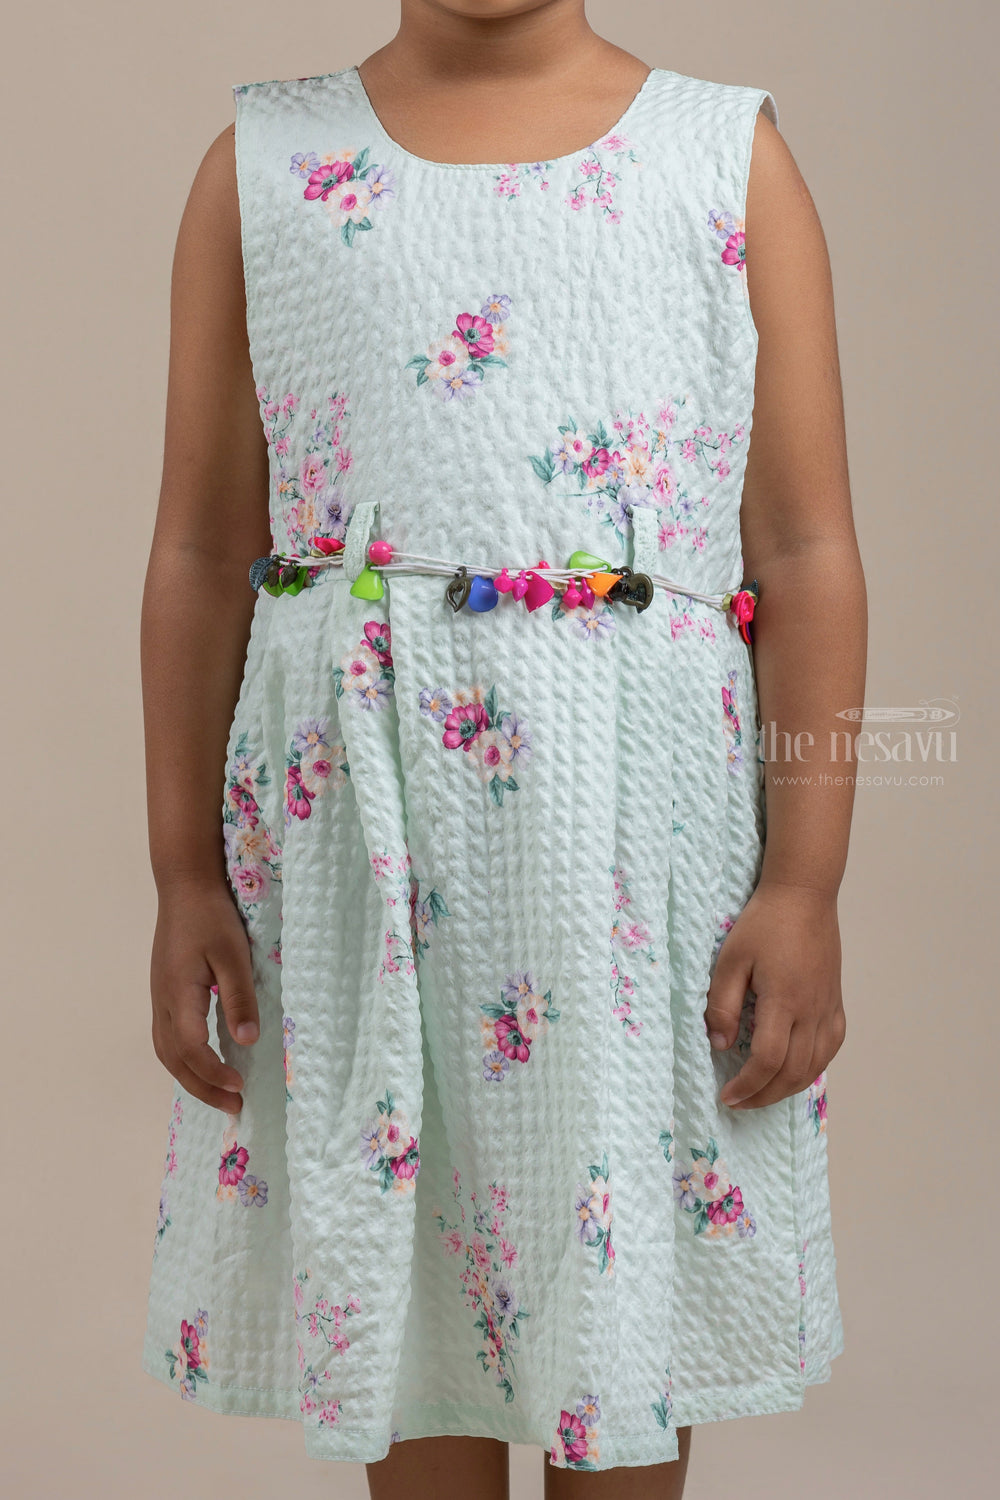 The Nesavu Baby Frock / Jhabla Cute Floral Printed White Ice Colored Baby Frock With Hand-Crafted Belt psr silks Nesavu